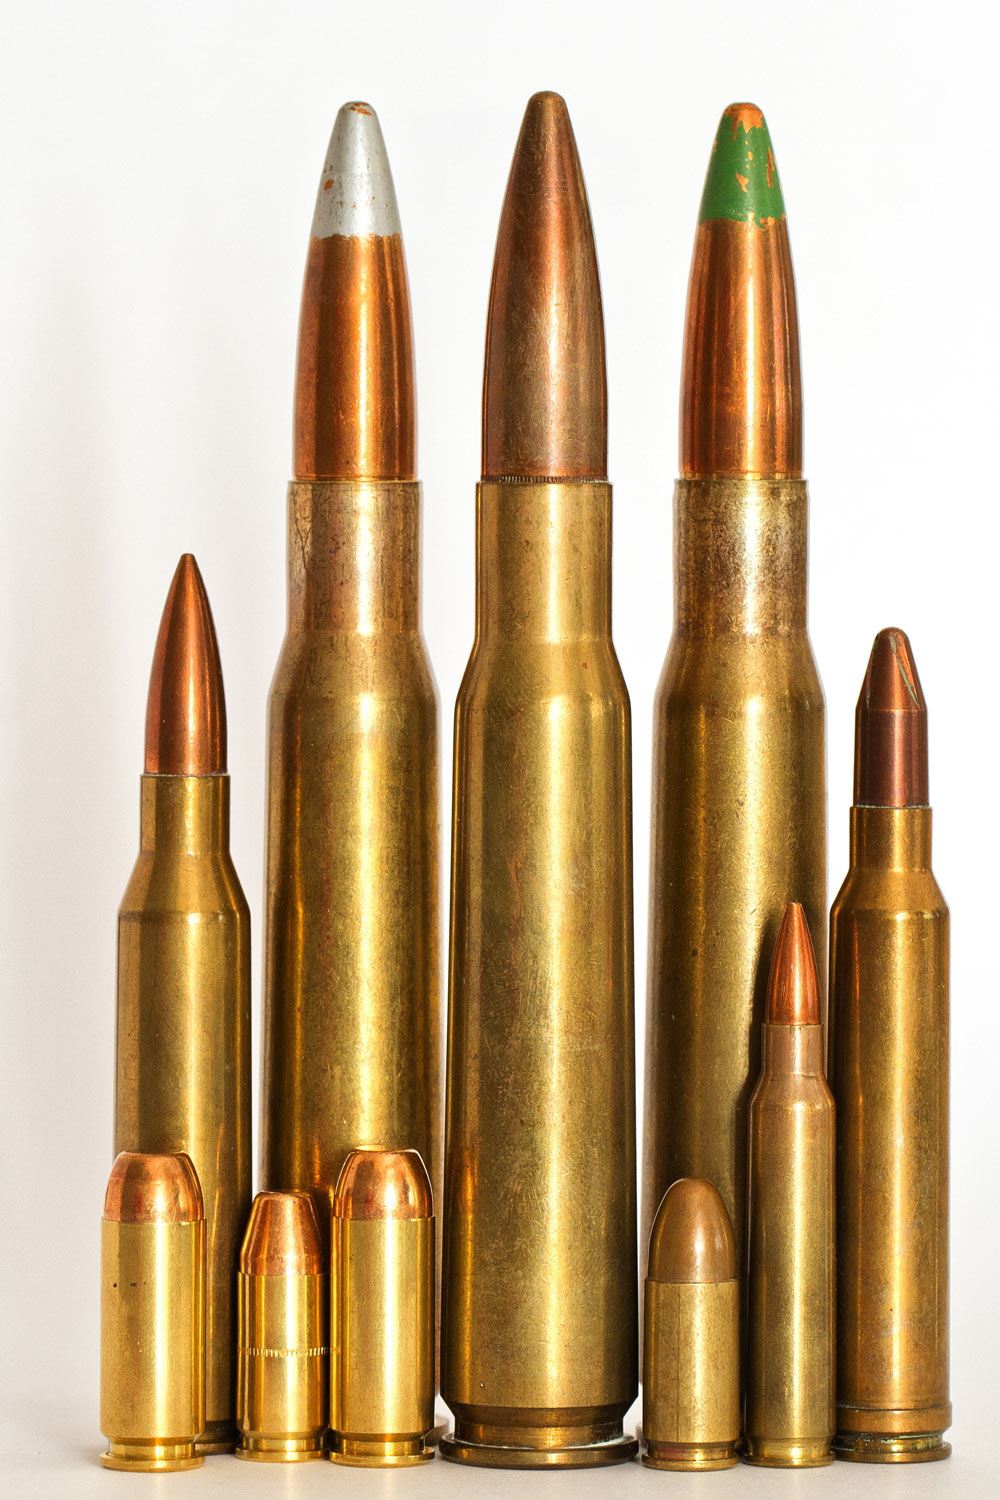 Truly we live in the golden age of ammo. There are more calibers and cartridges available now than at any other time in the history of firearms.